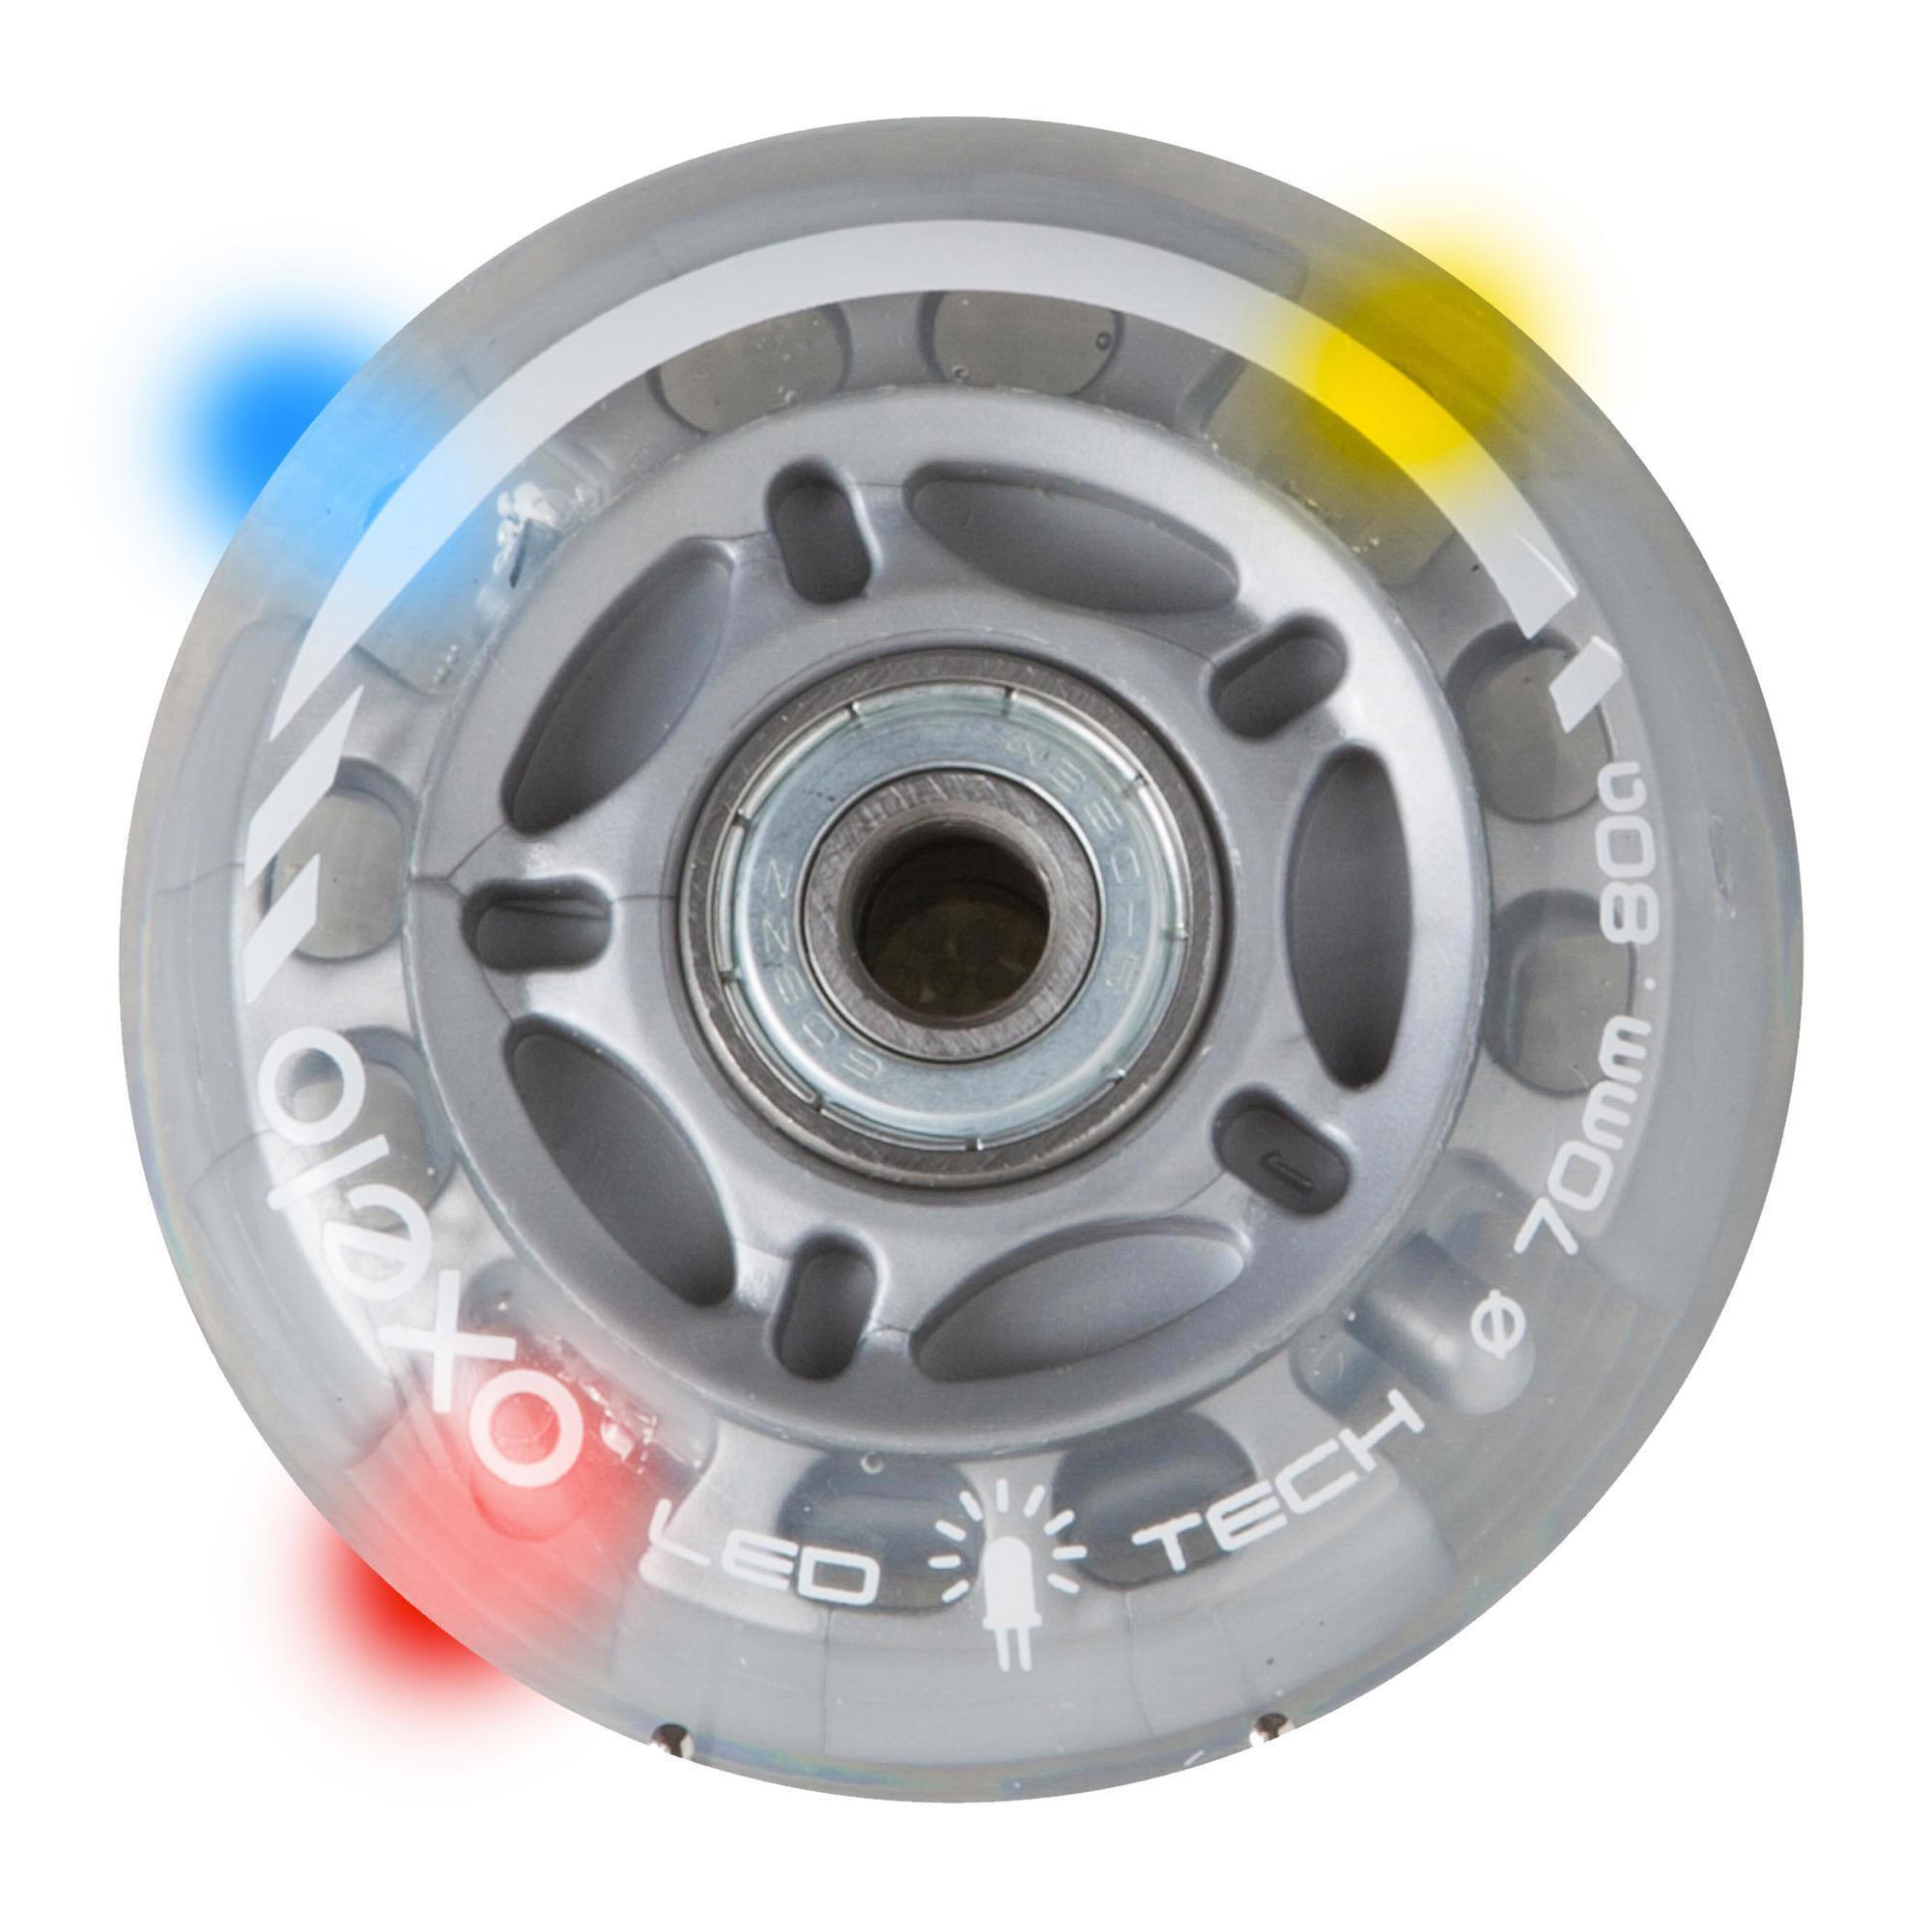 Refurbished Kids 70 mm 82A Light-Up Inline Skate Wheels with Bearings - A Grade 1/7